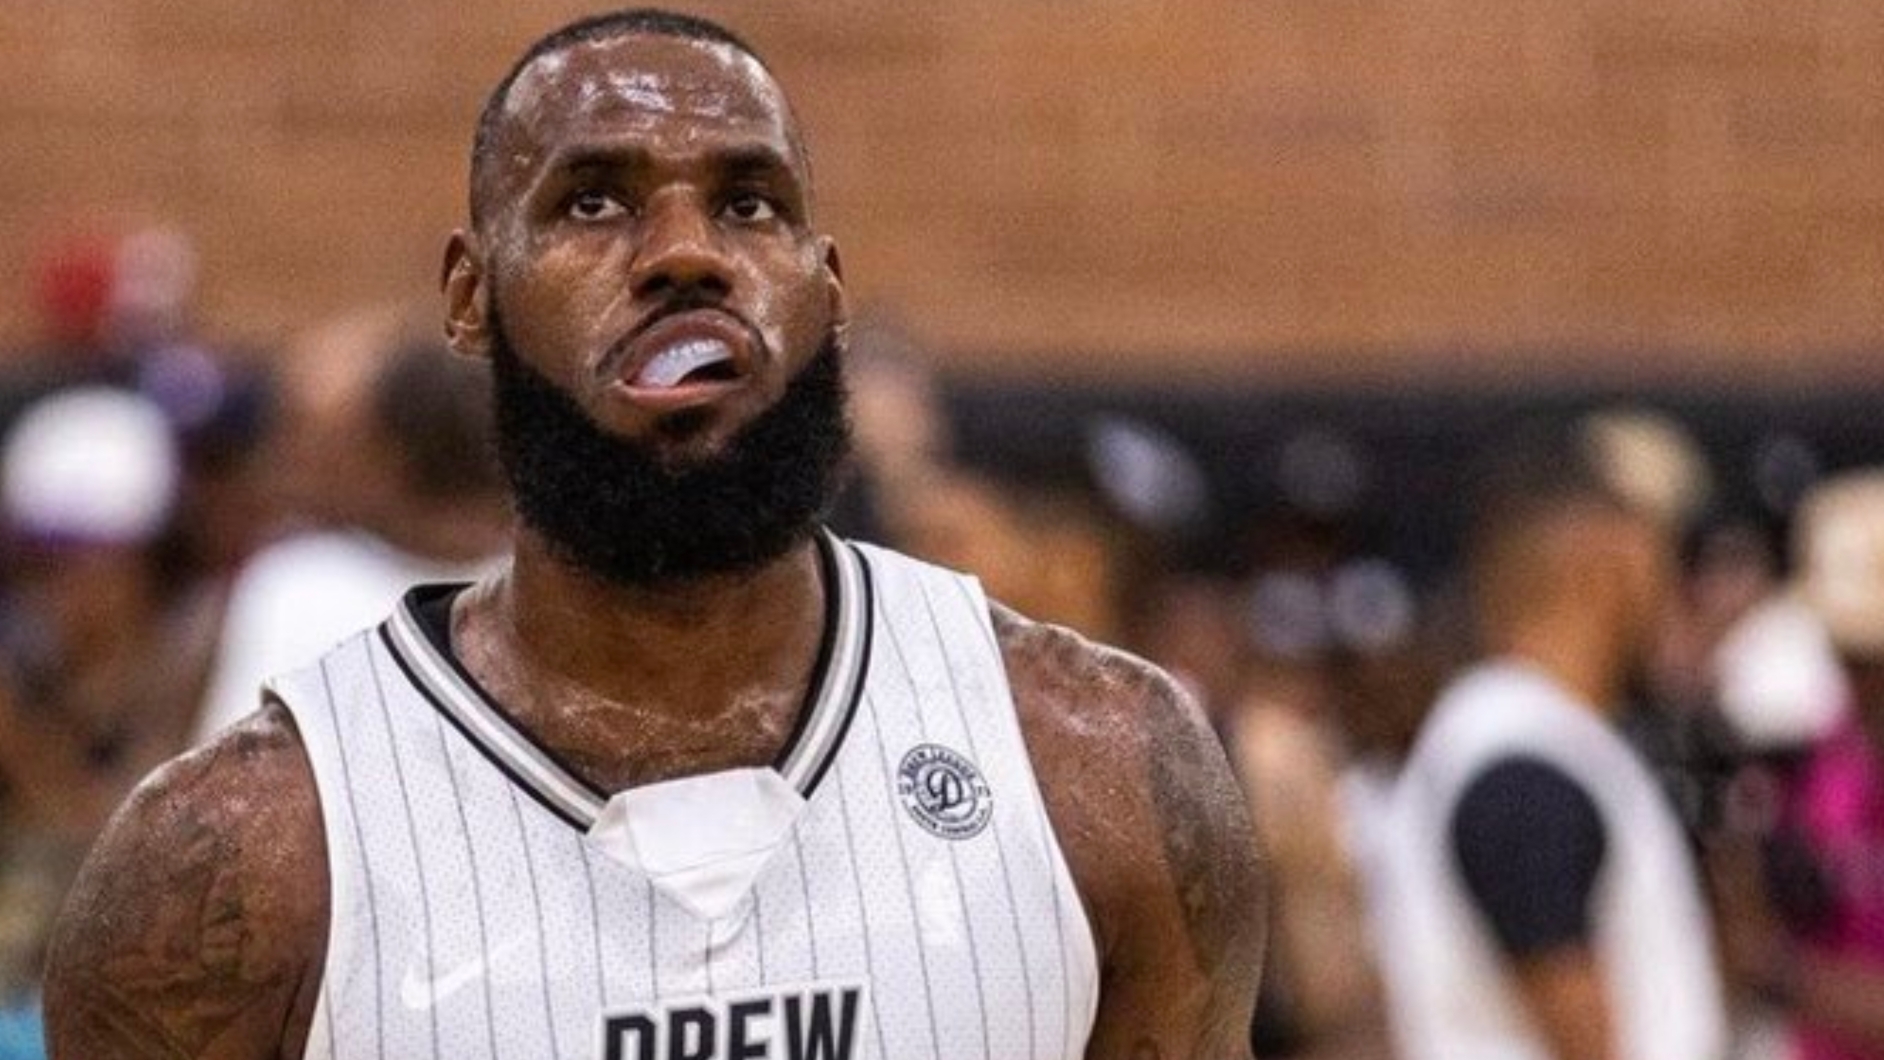 LeBron takes over the Drew League with 42-point game - Stream the Video